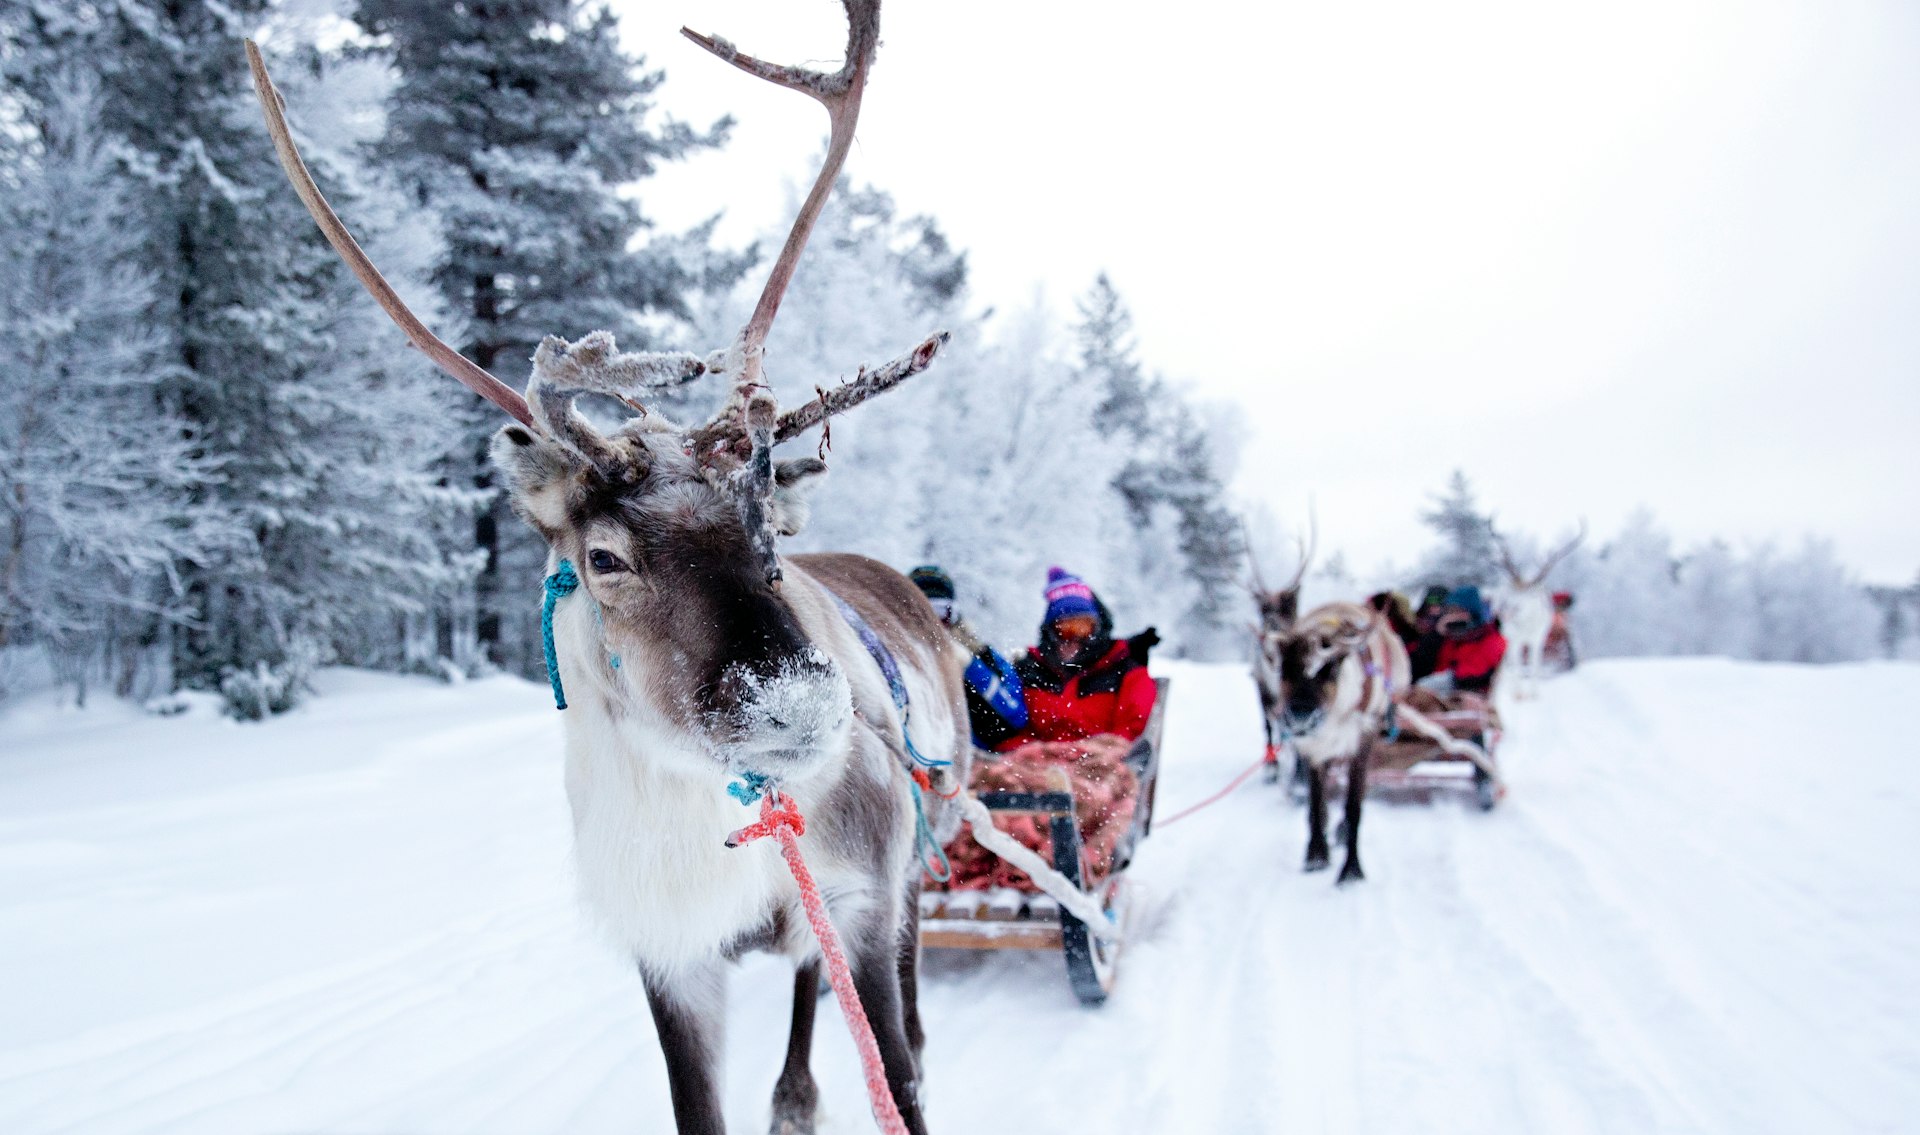 A traditional sleigh ride with the Sami people in Finnish Lapland, Finland